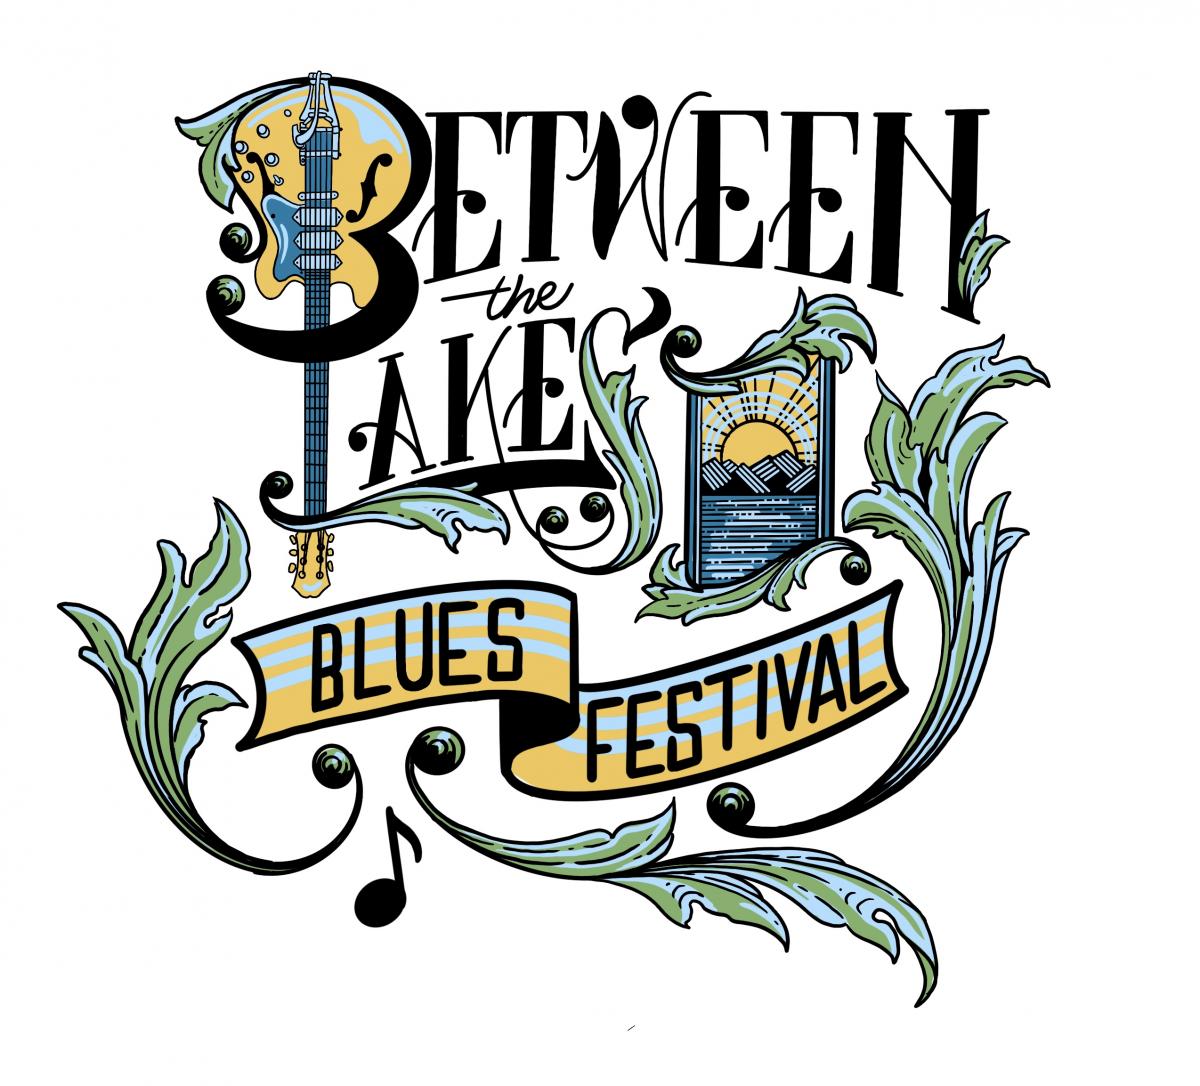 Between the Lakes Blues Festival cover image